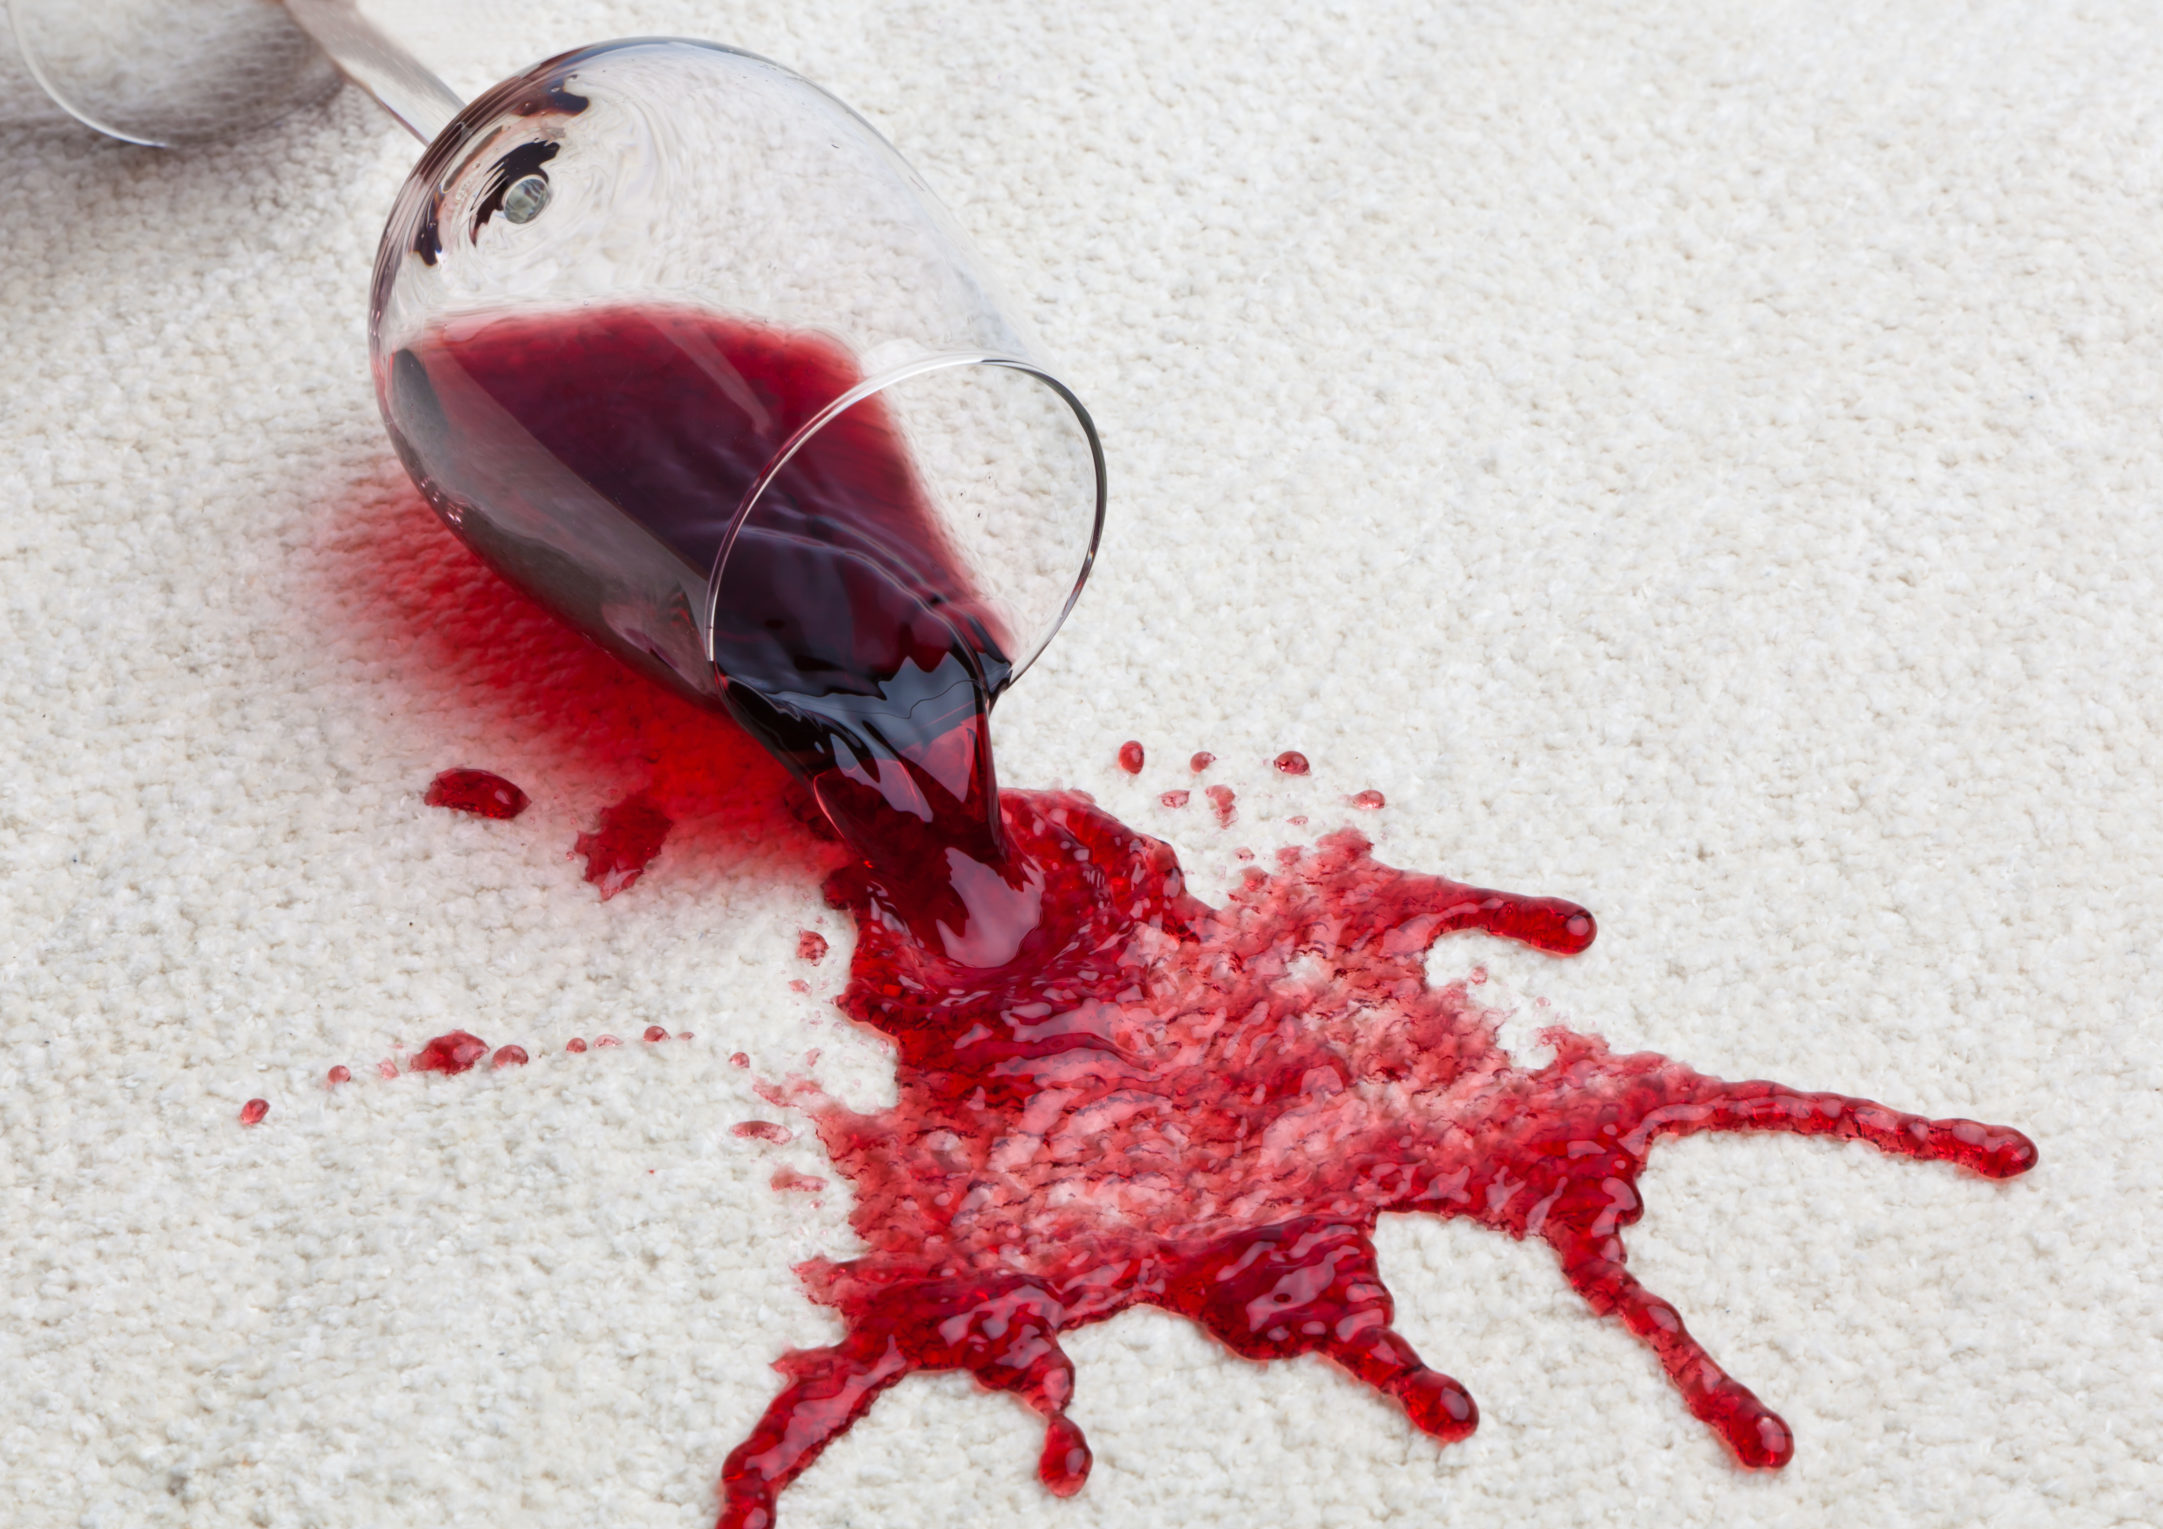 A glass of red wine spilling onto a clean white carpet